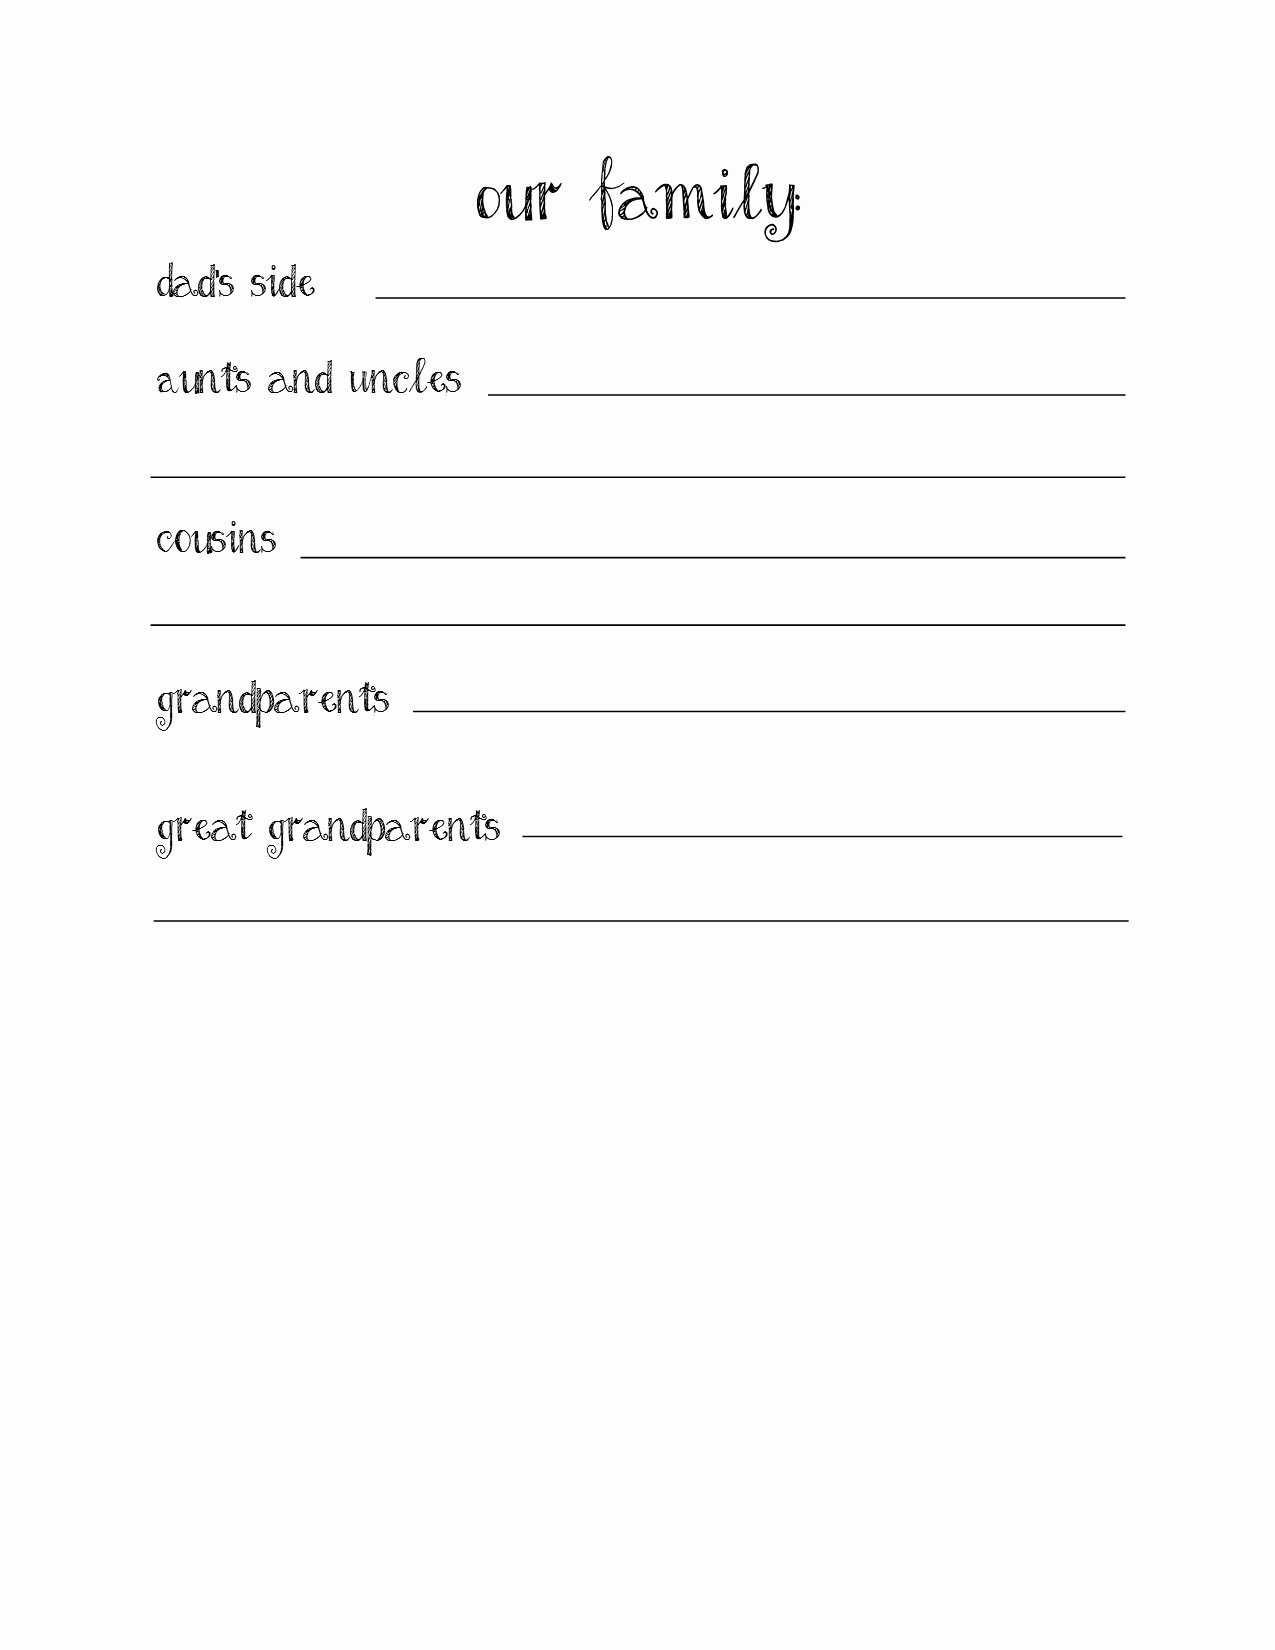 Free Printable Baby Book Pages New Make A Diy Baby Book with A Handwritten Style Font with